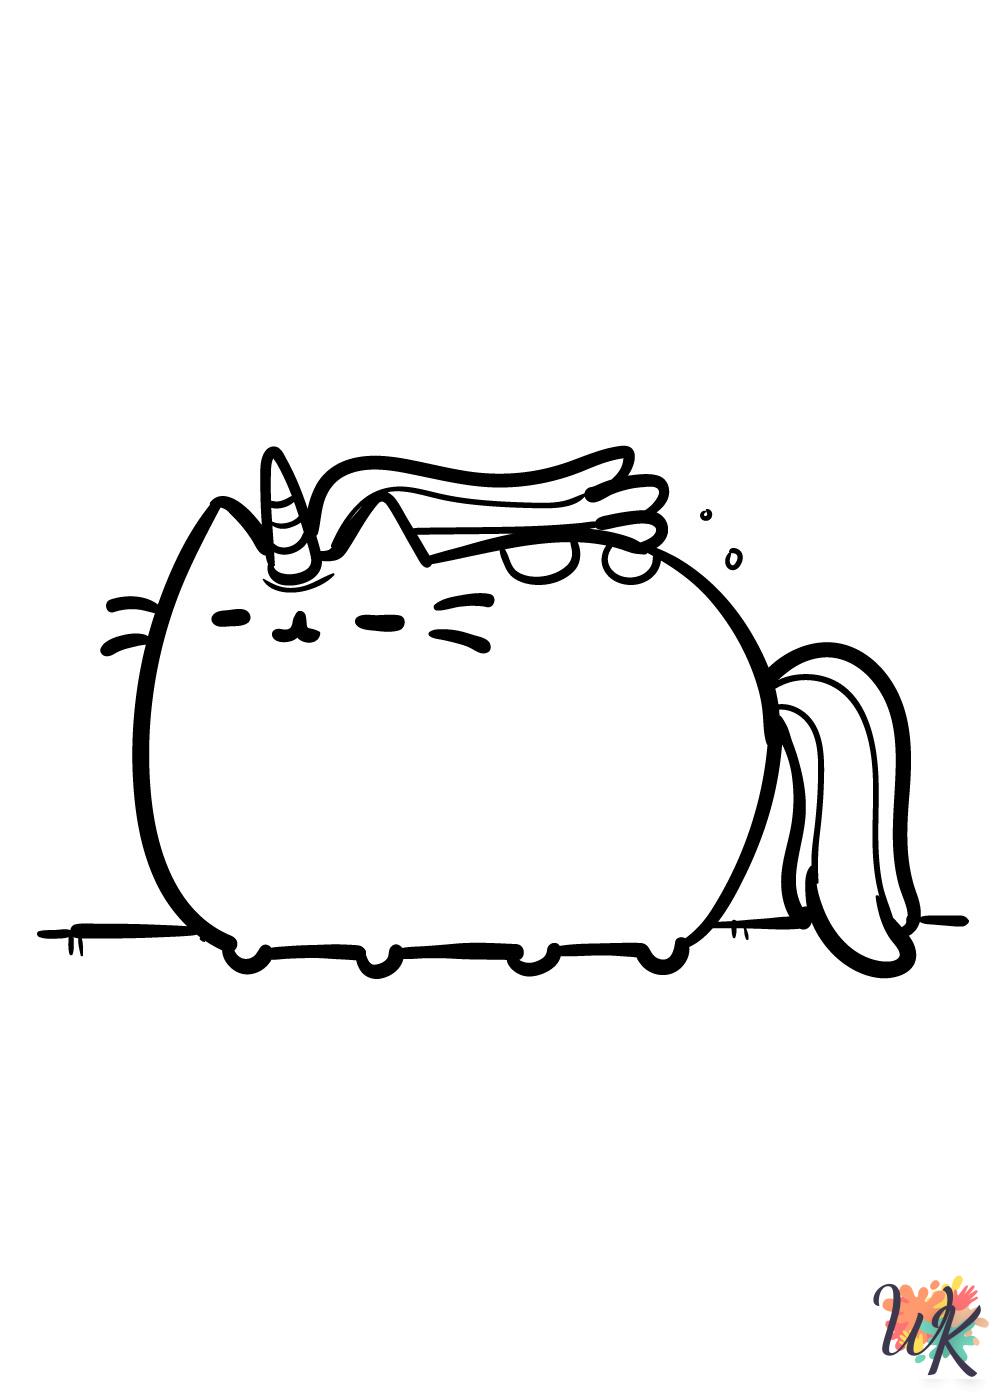 Pusheen coloring pages pdf